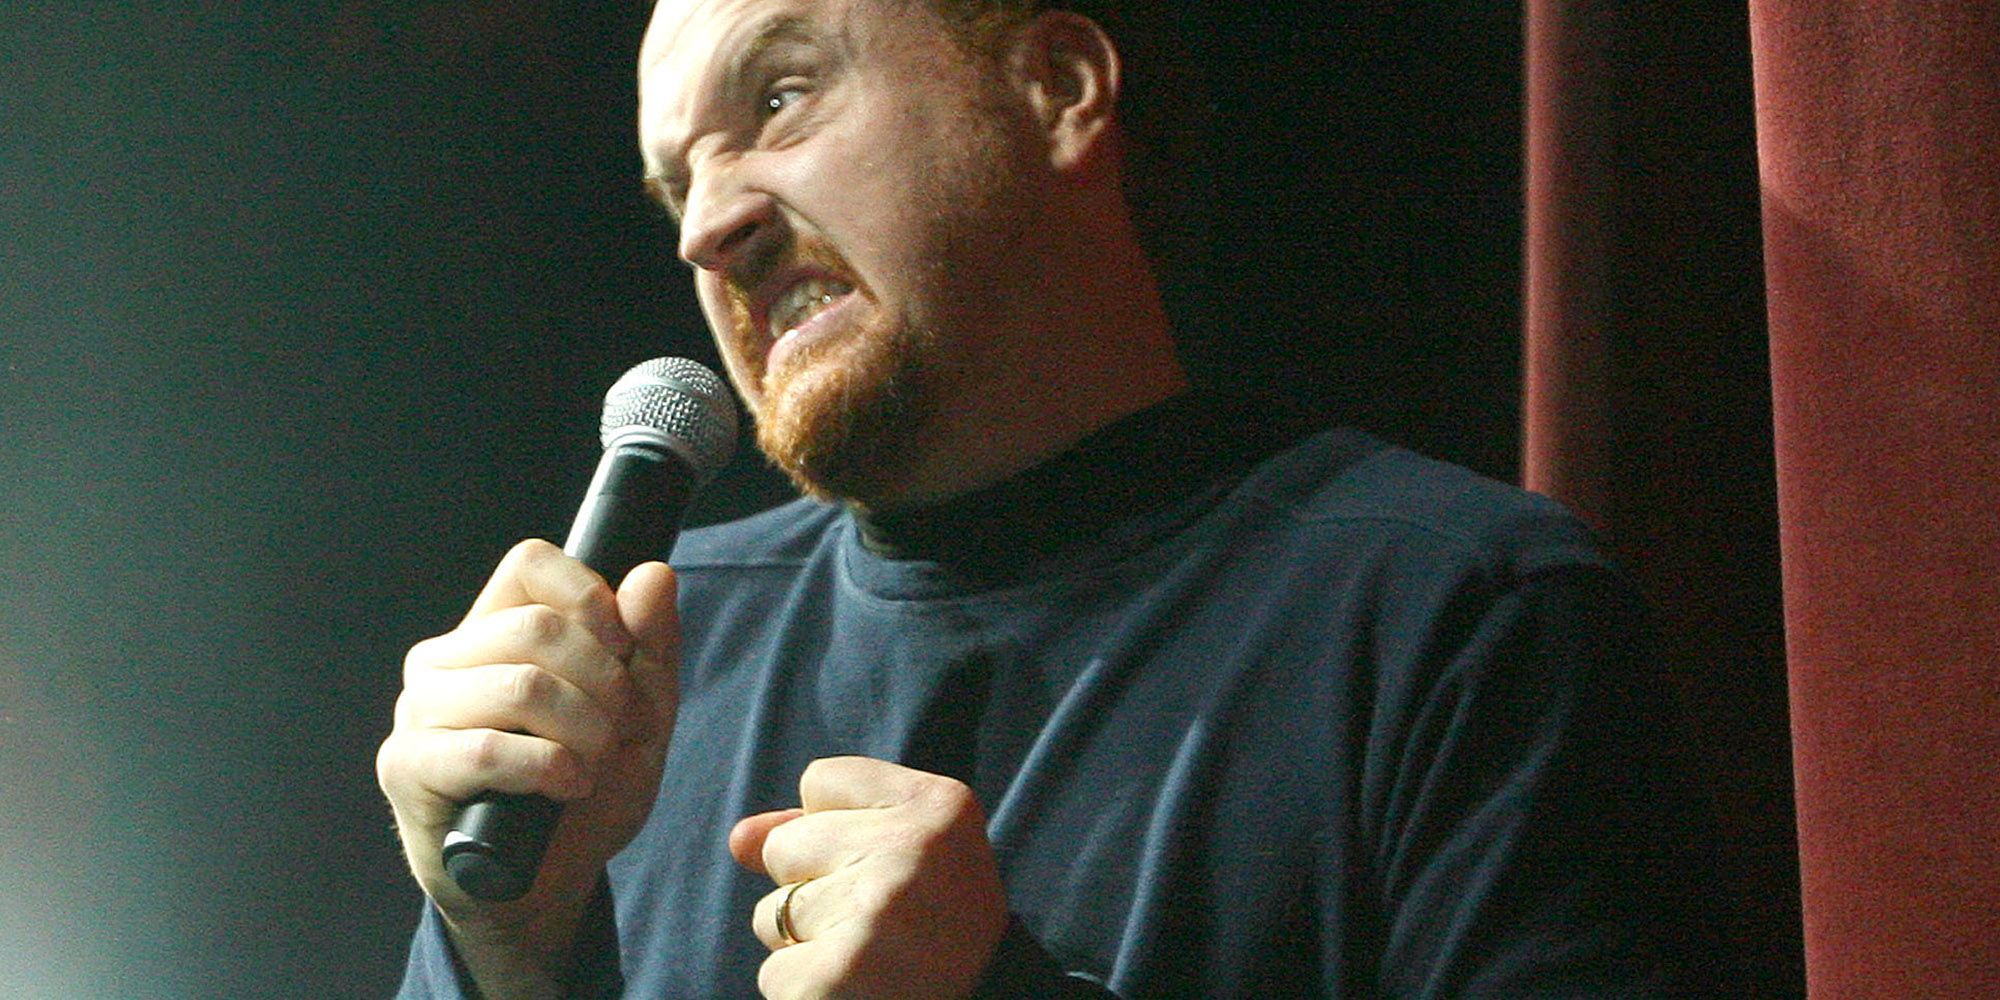 Louis C.K. reportedly returns to Comedy Cellar for another surprise set